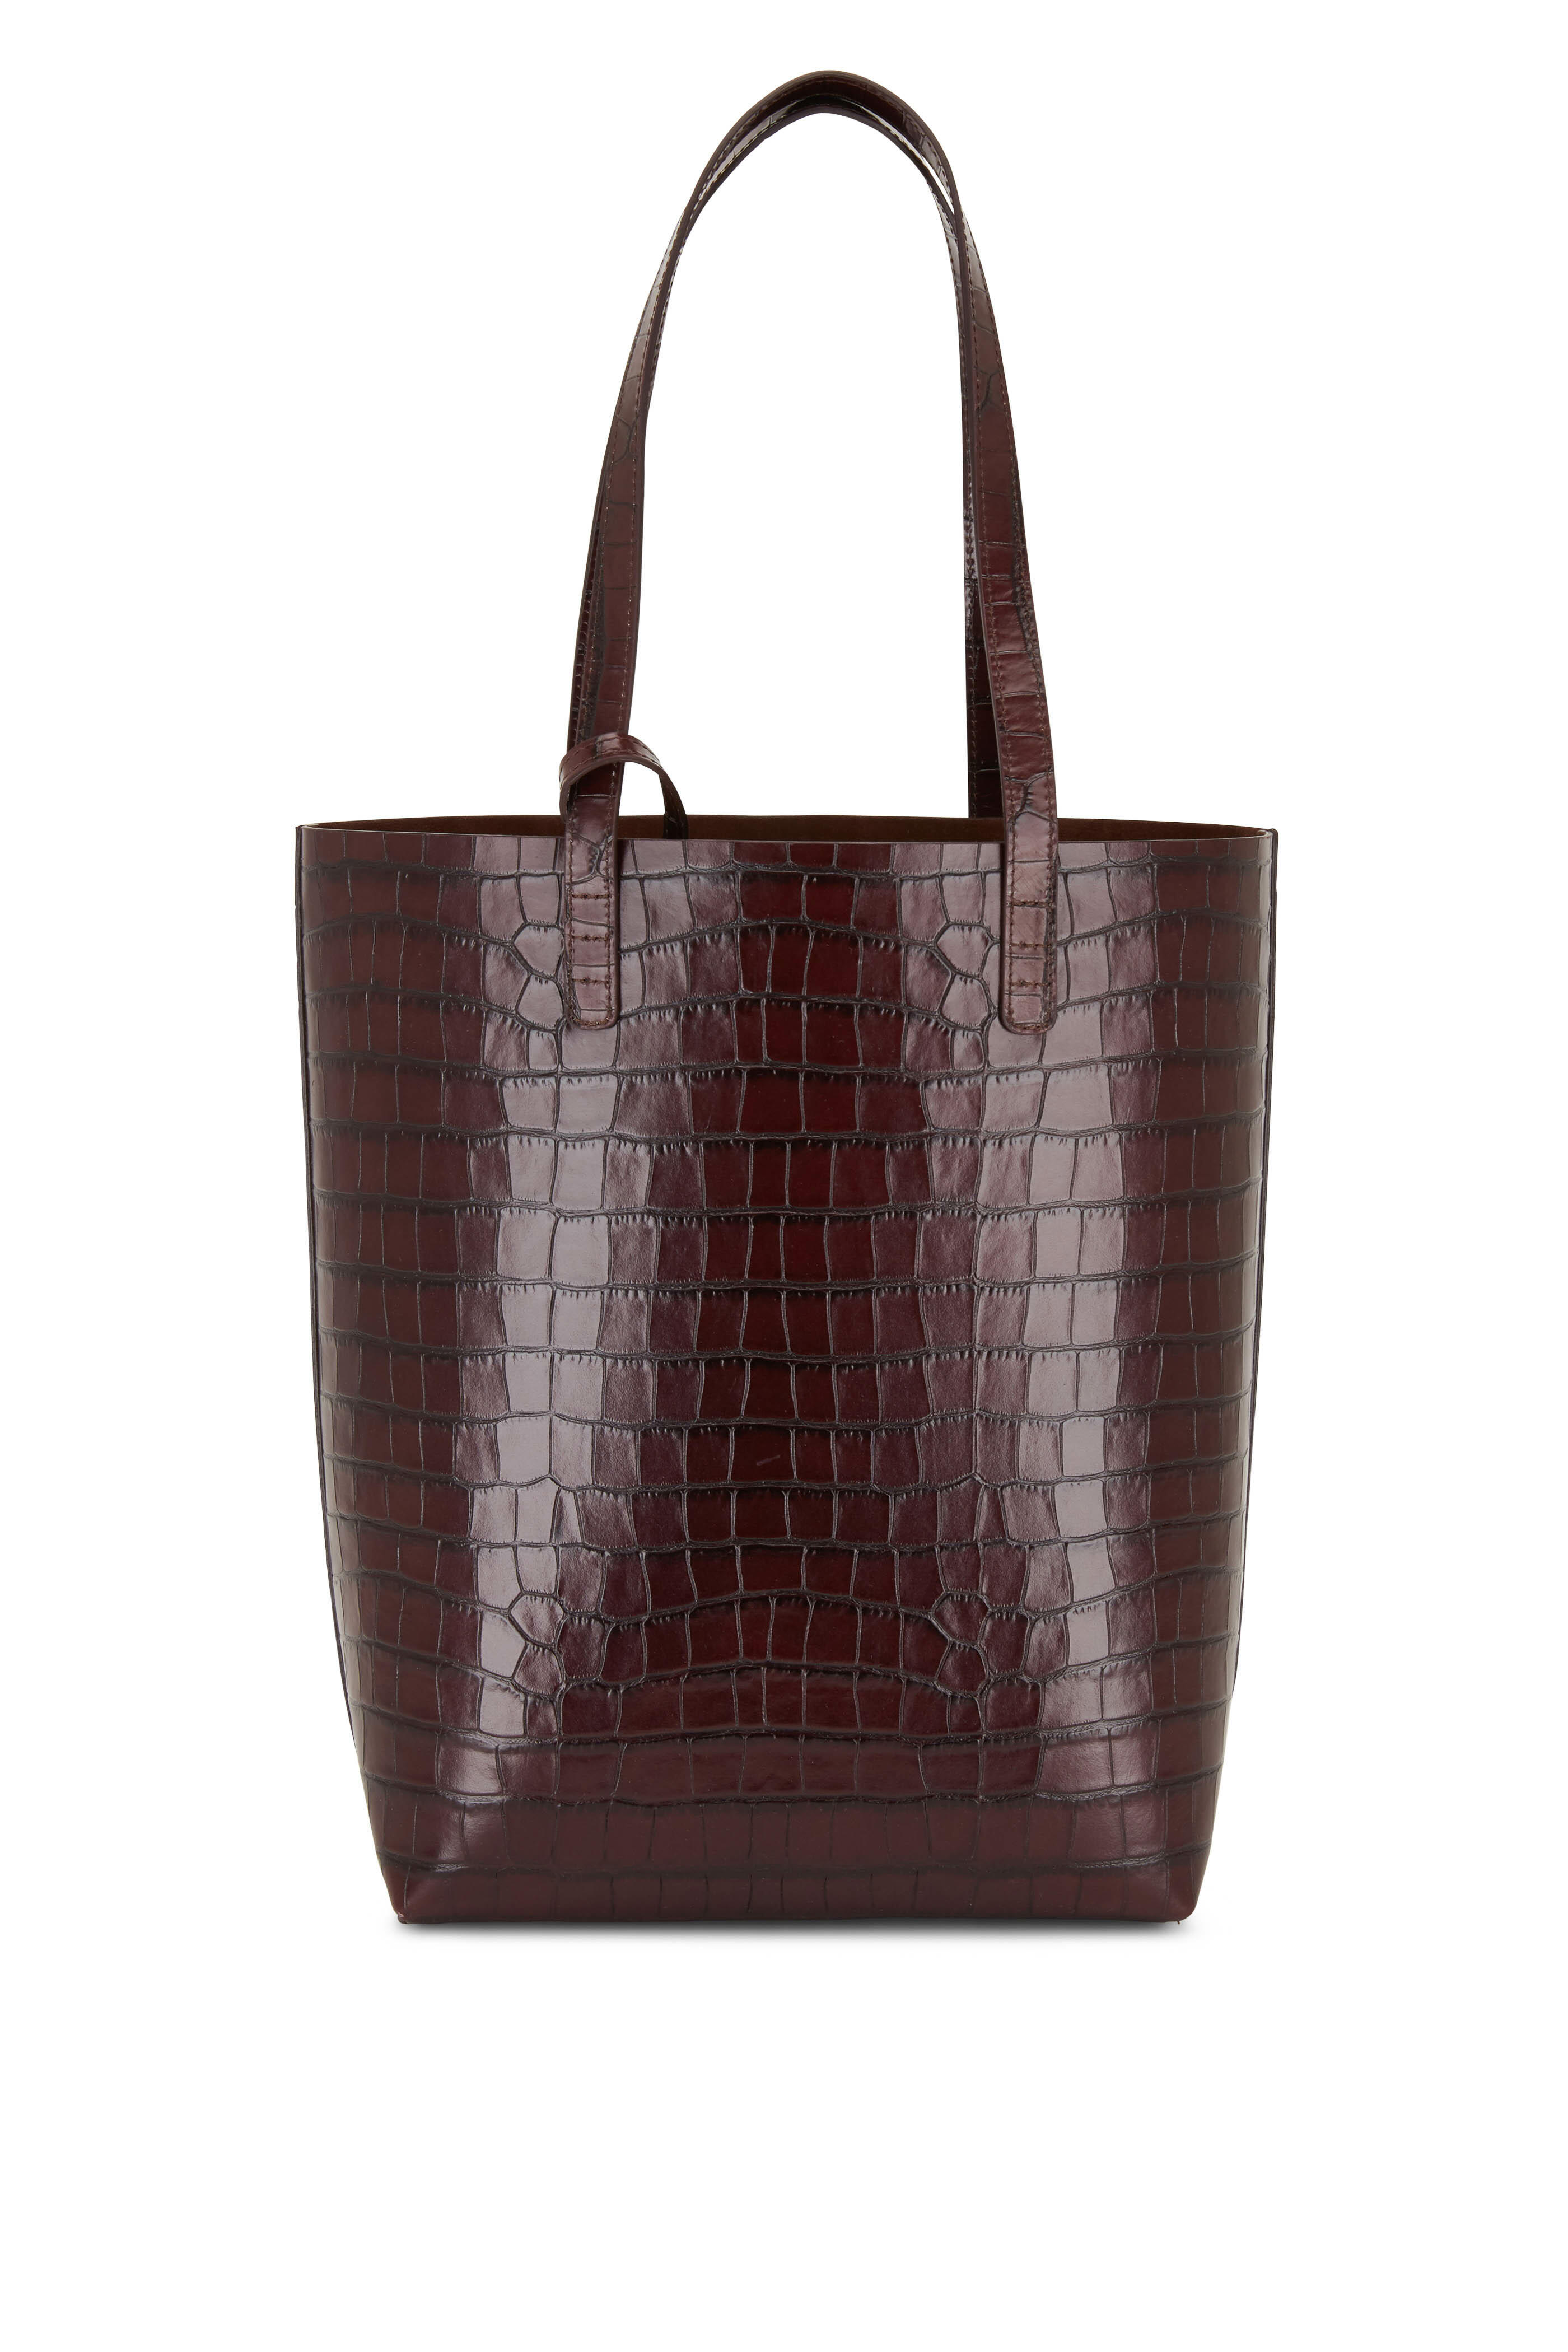 M St. Tote Bag in Brown and Mocha Caiman Croc Embossed Leather – Town &  Shore Handcrafted